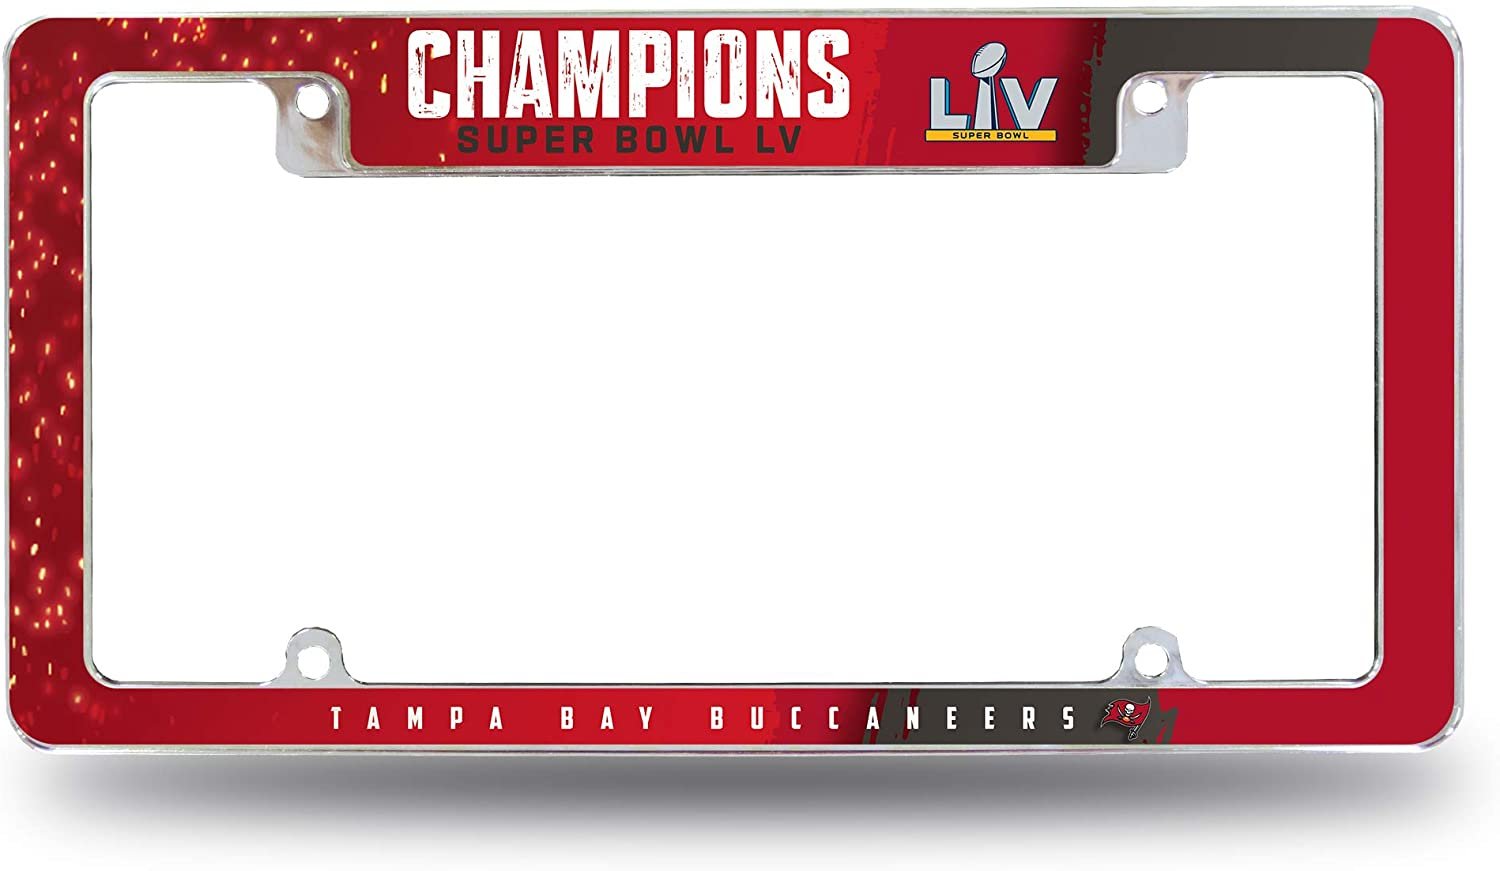 Tampa Bay Buccaneers Super Bowl LV Champions Metal License Plate Frame Tag Cover, All Over Design, 12x6 Inch